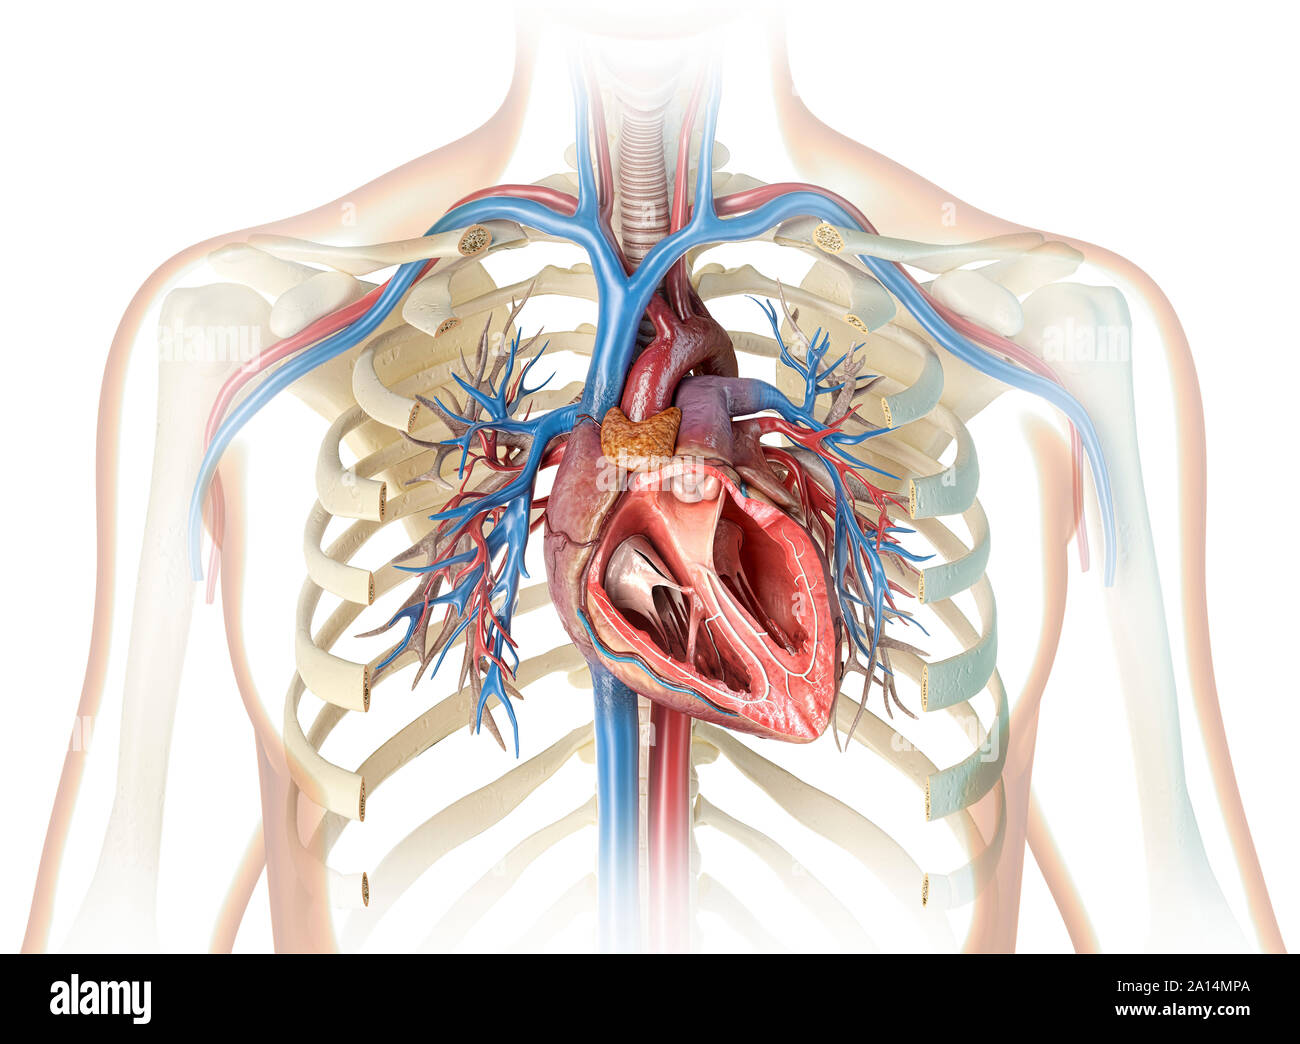 Human heart cross-section with vessels, bronchial tree and cut rib cage. Stock Photo